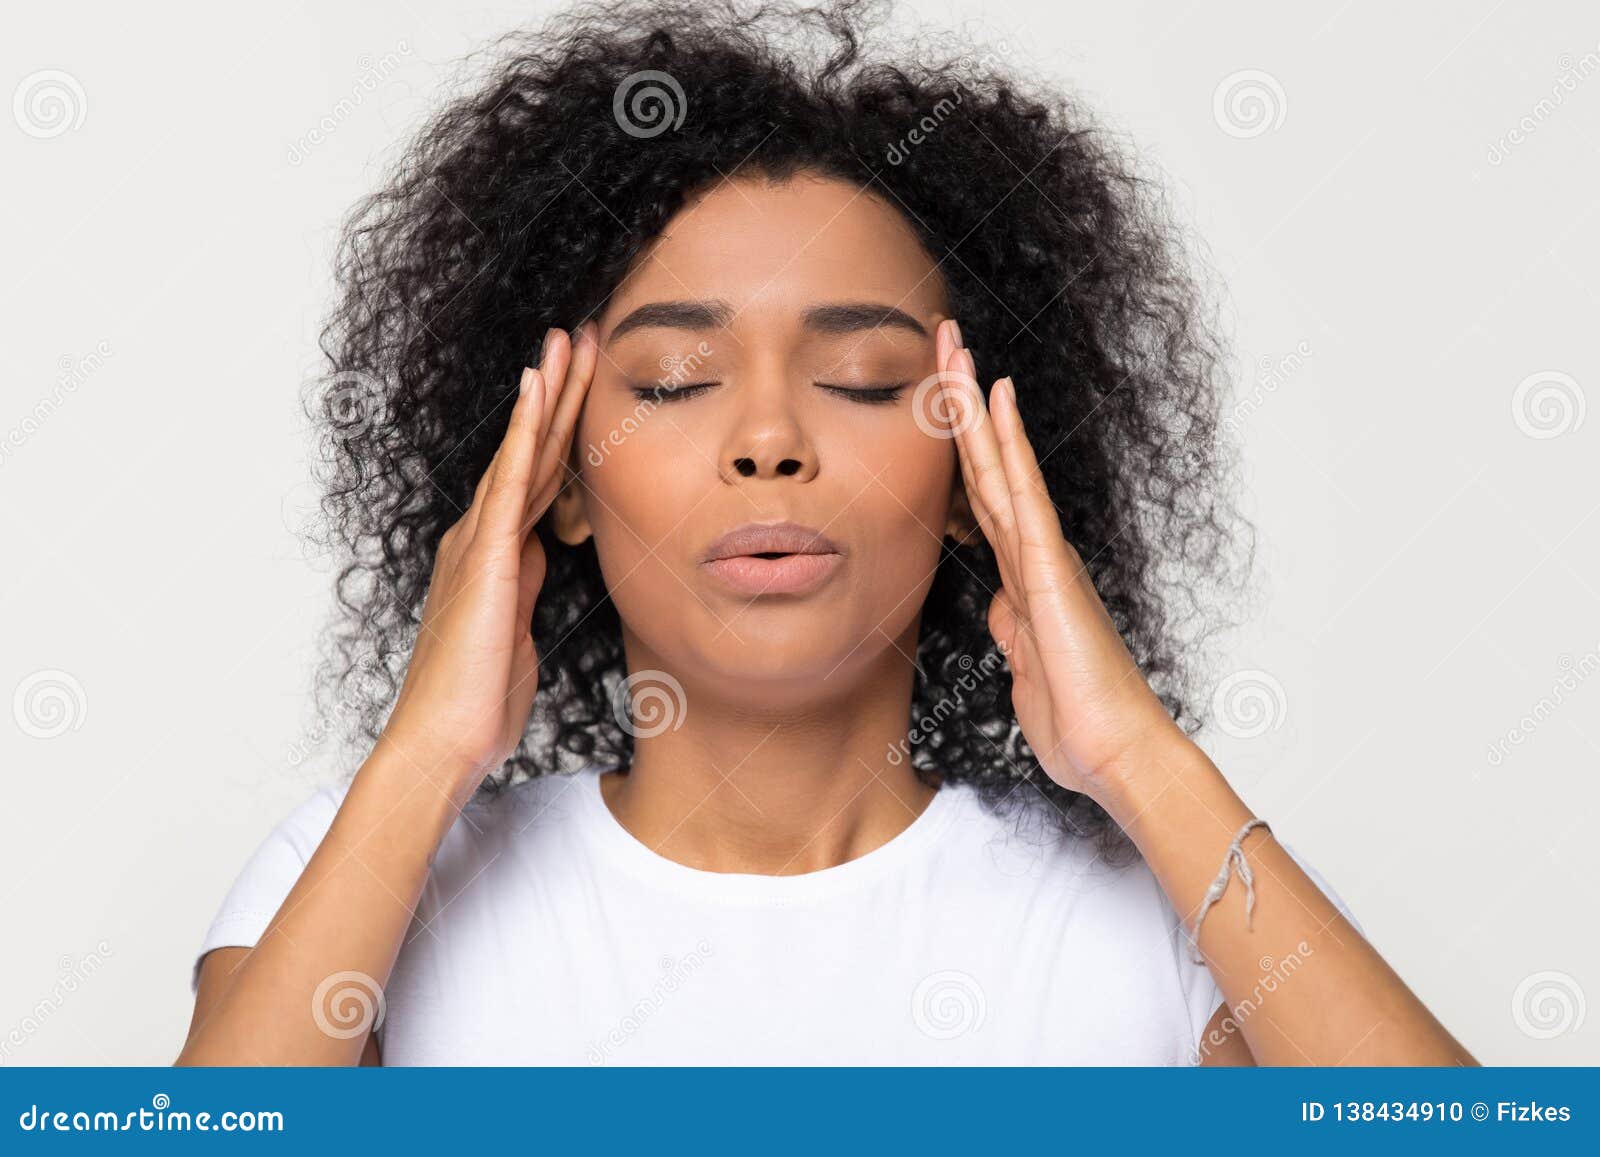 nervous african woman breathing calming down trying to relieve stress